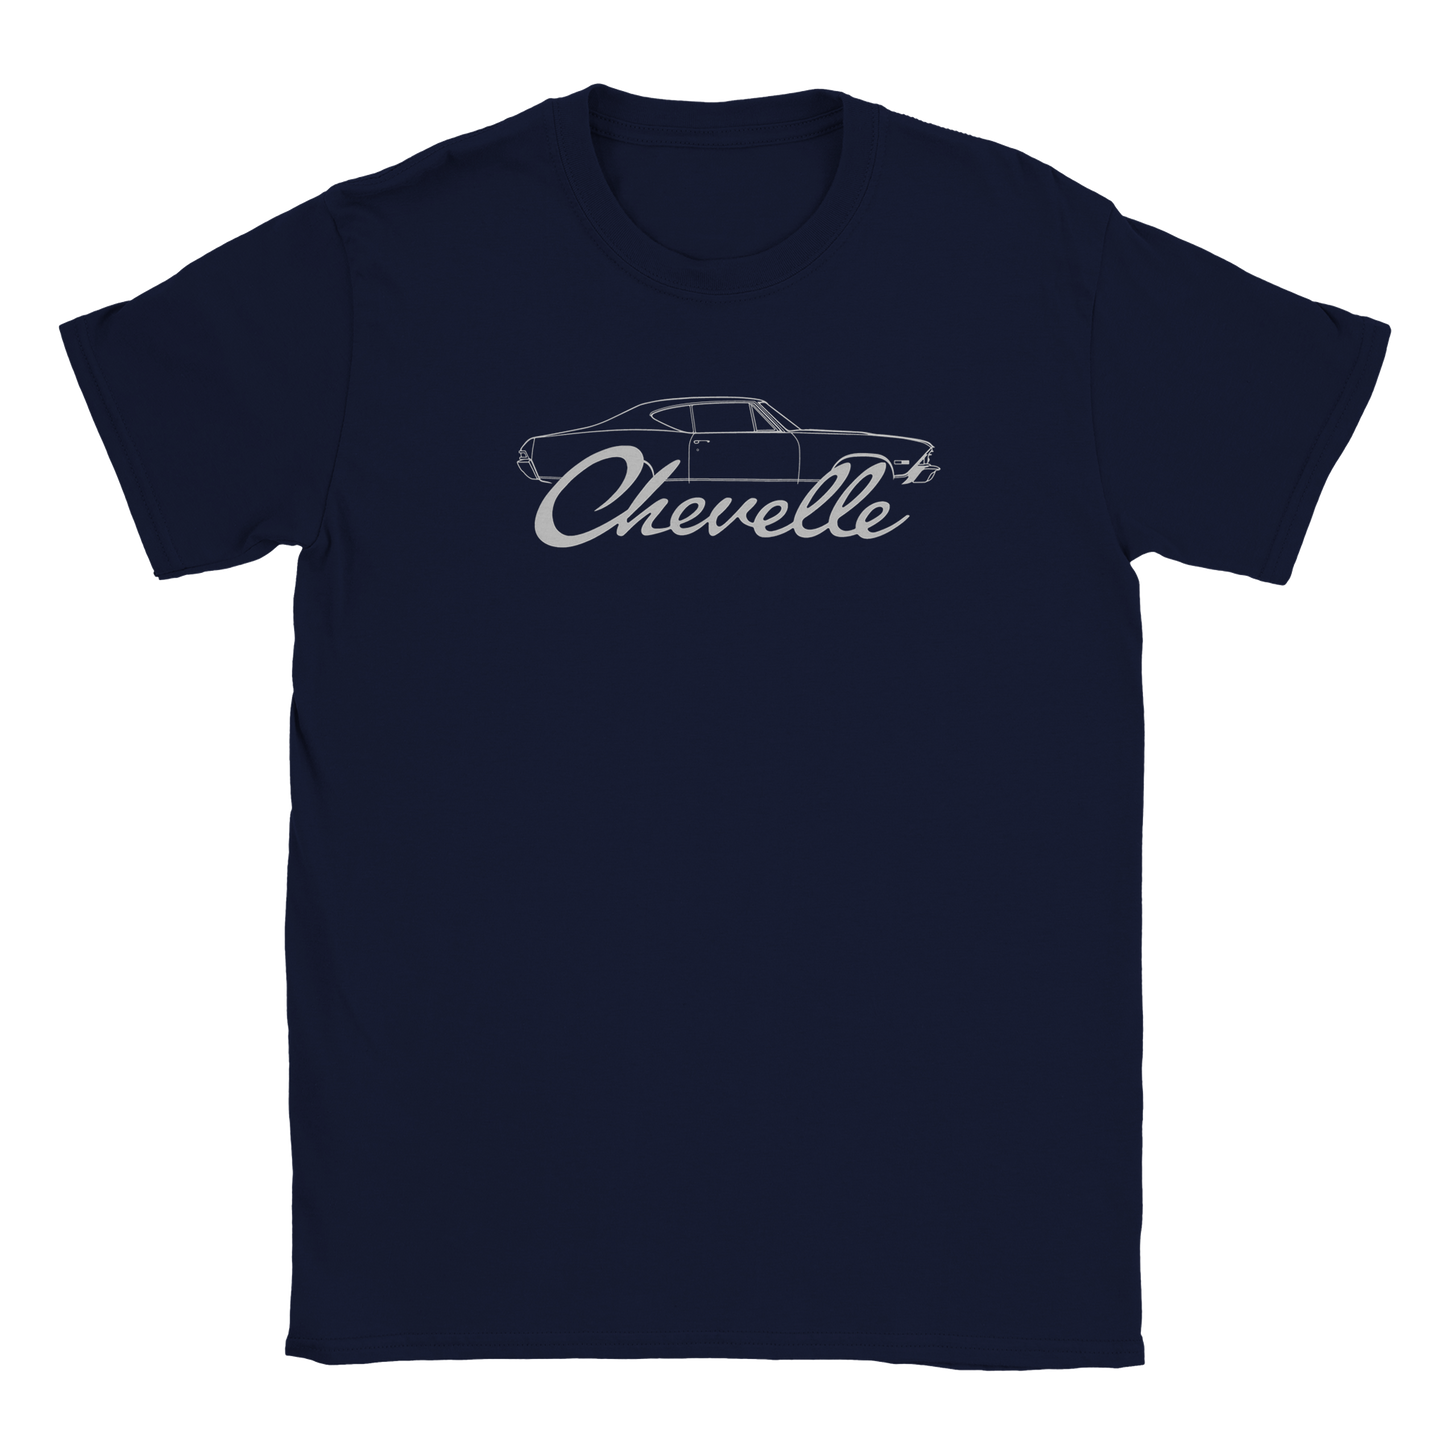 a blue chevrolet t - shirt with the word chevrolet on it